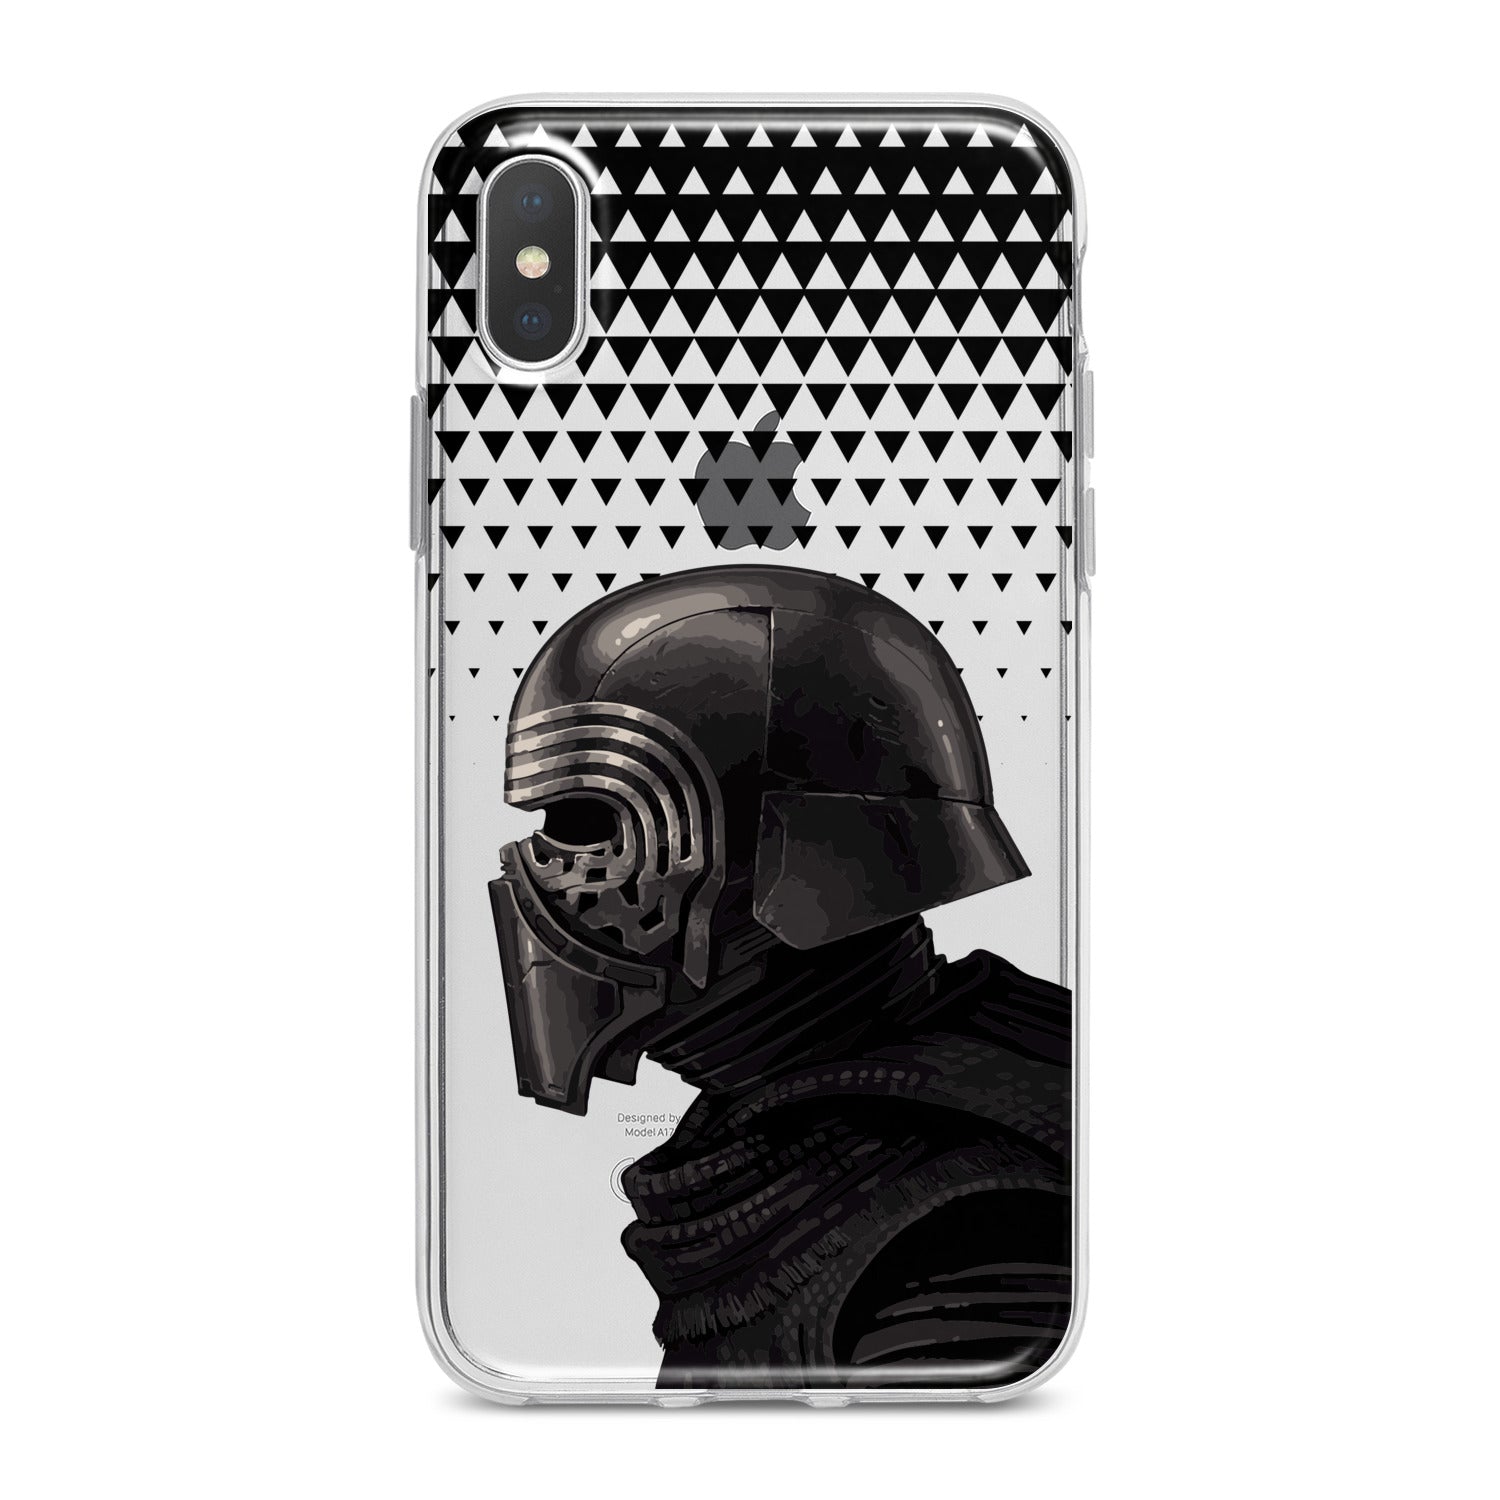 Lex Altern Kylo Ren Art Phone Case for your iPhone & Android phone.